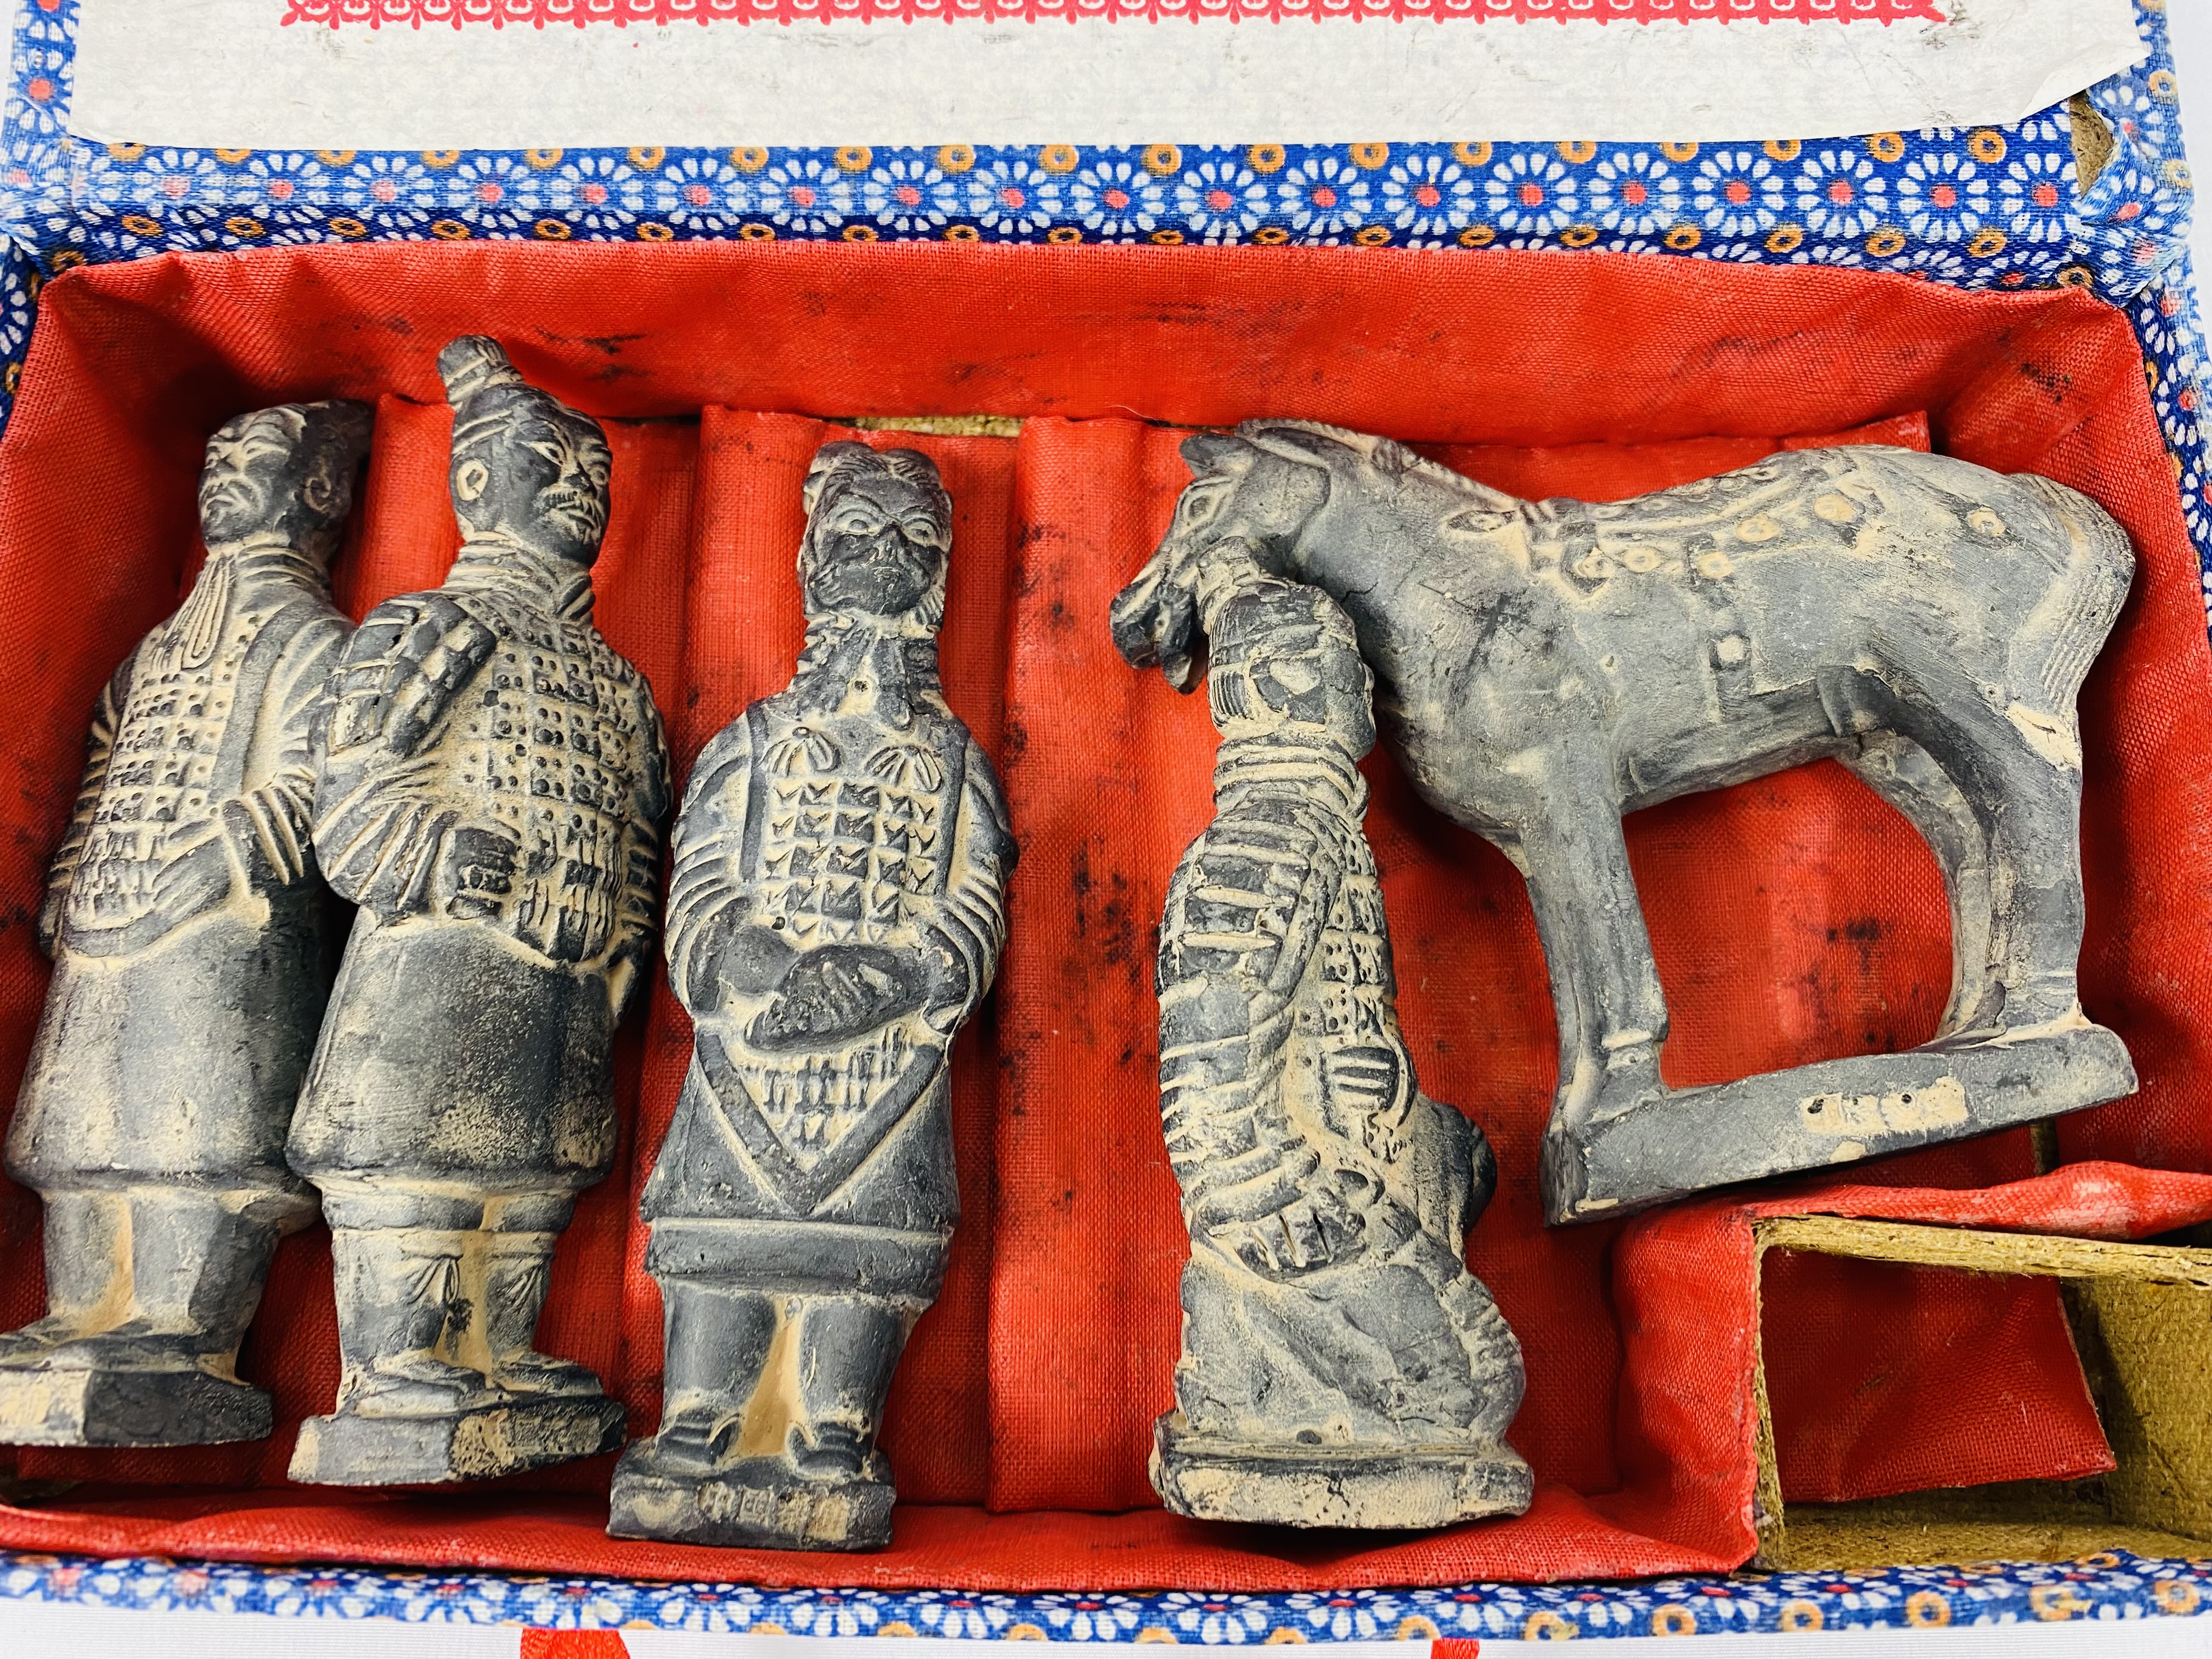 Set of five models of the terracotta army together with a commemorative coin - Image 3 of 4